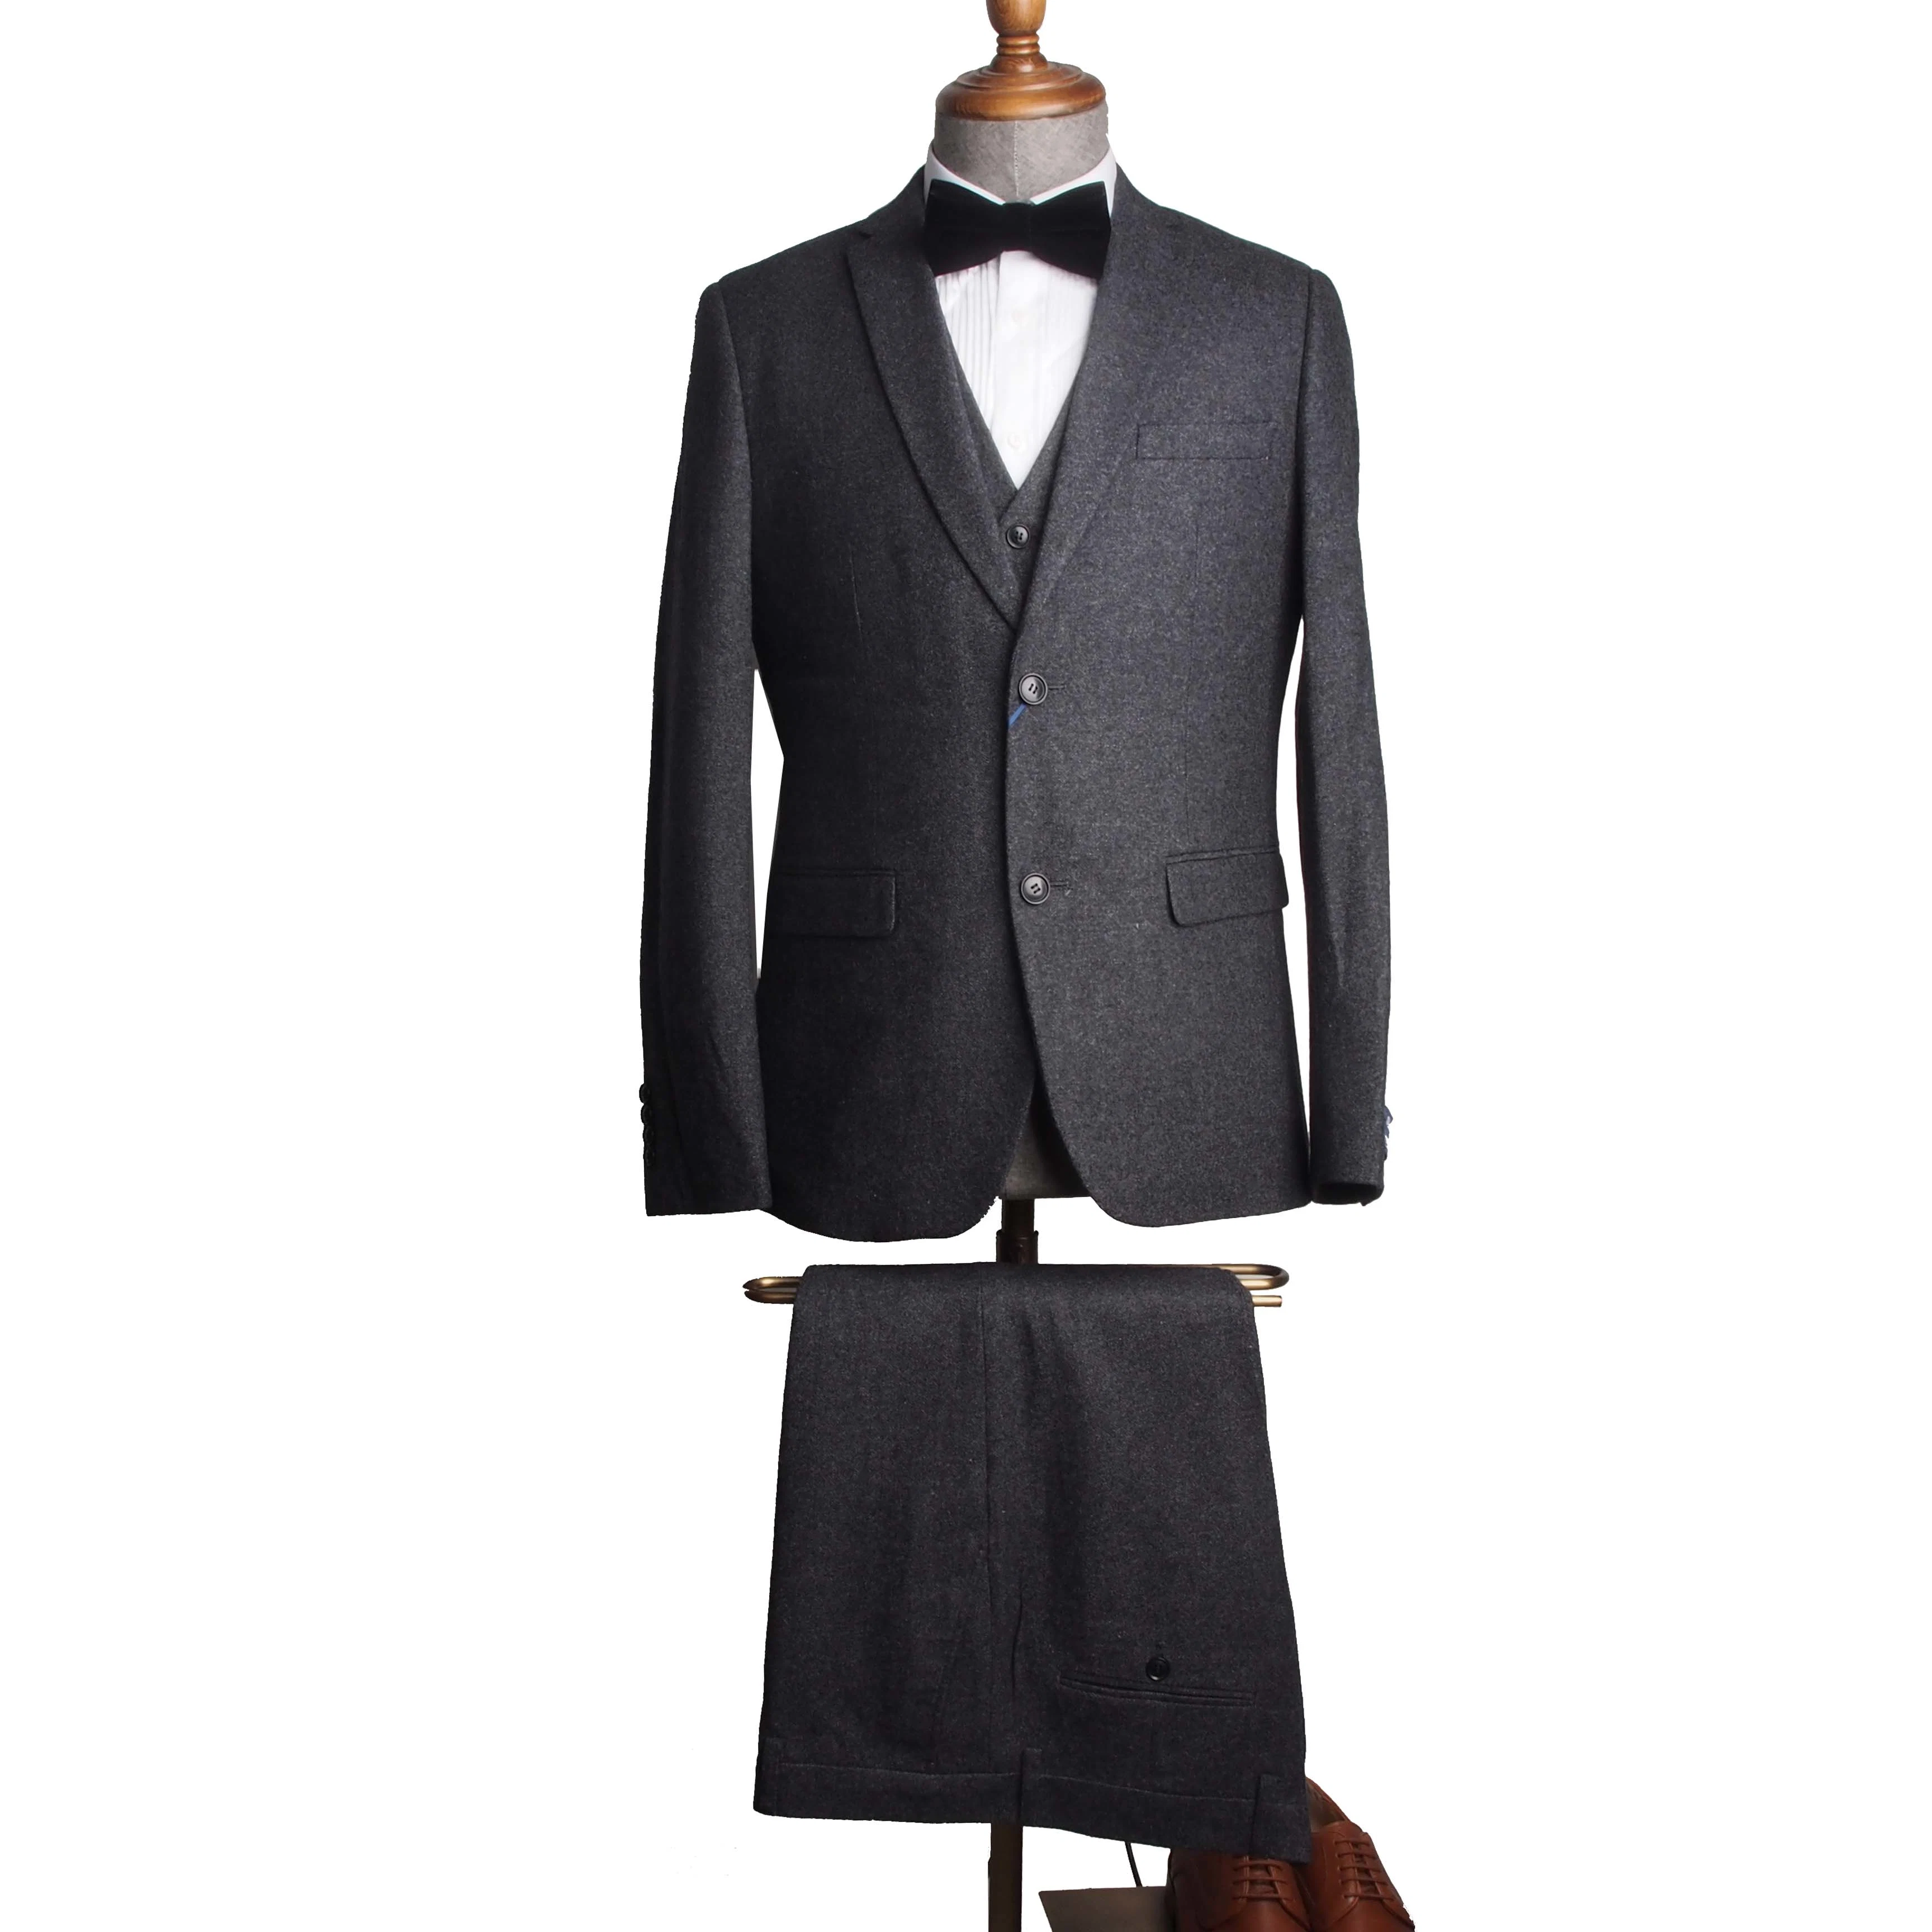 Tailor Made Fashion Clothes Apparel Tuxedos Men Suits Wedding Suit